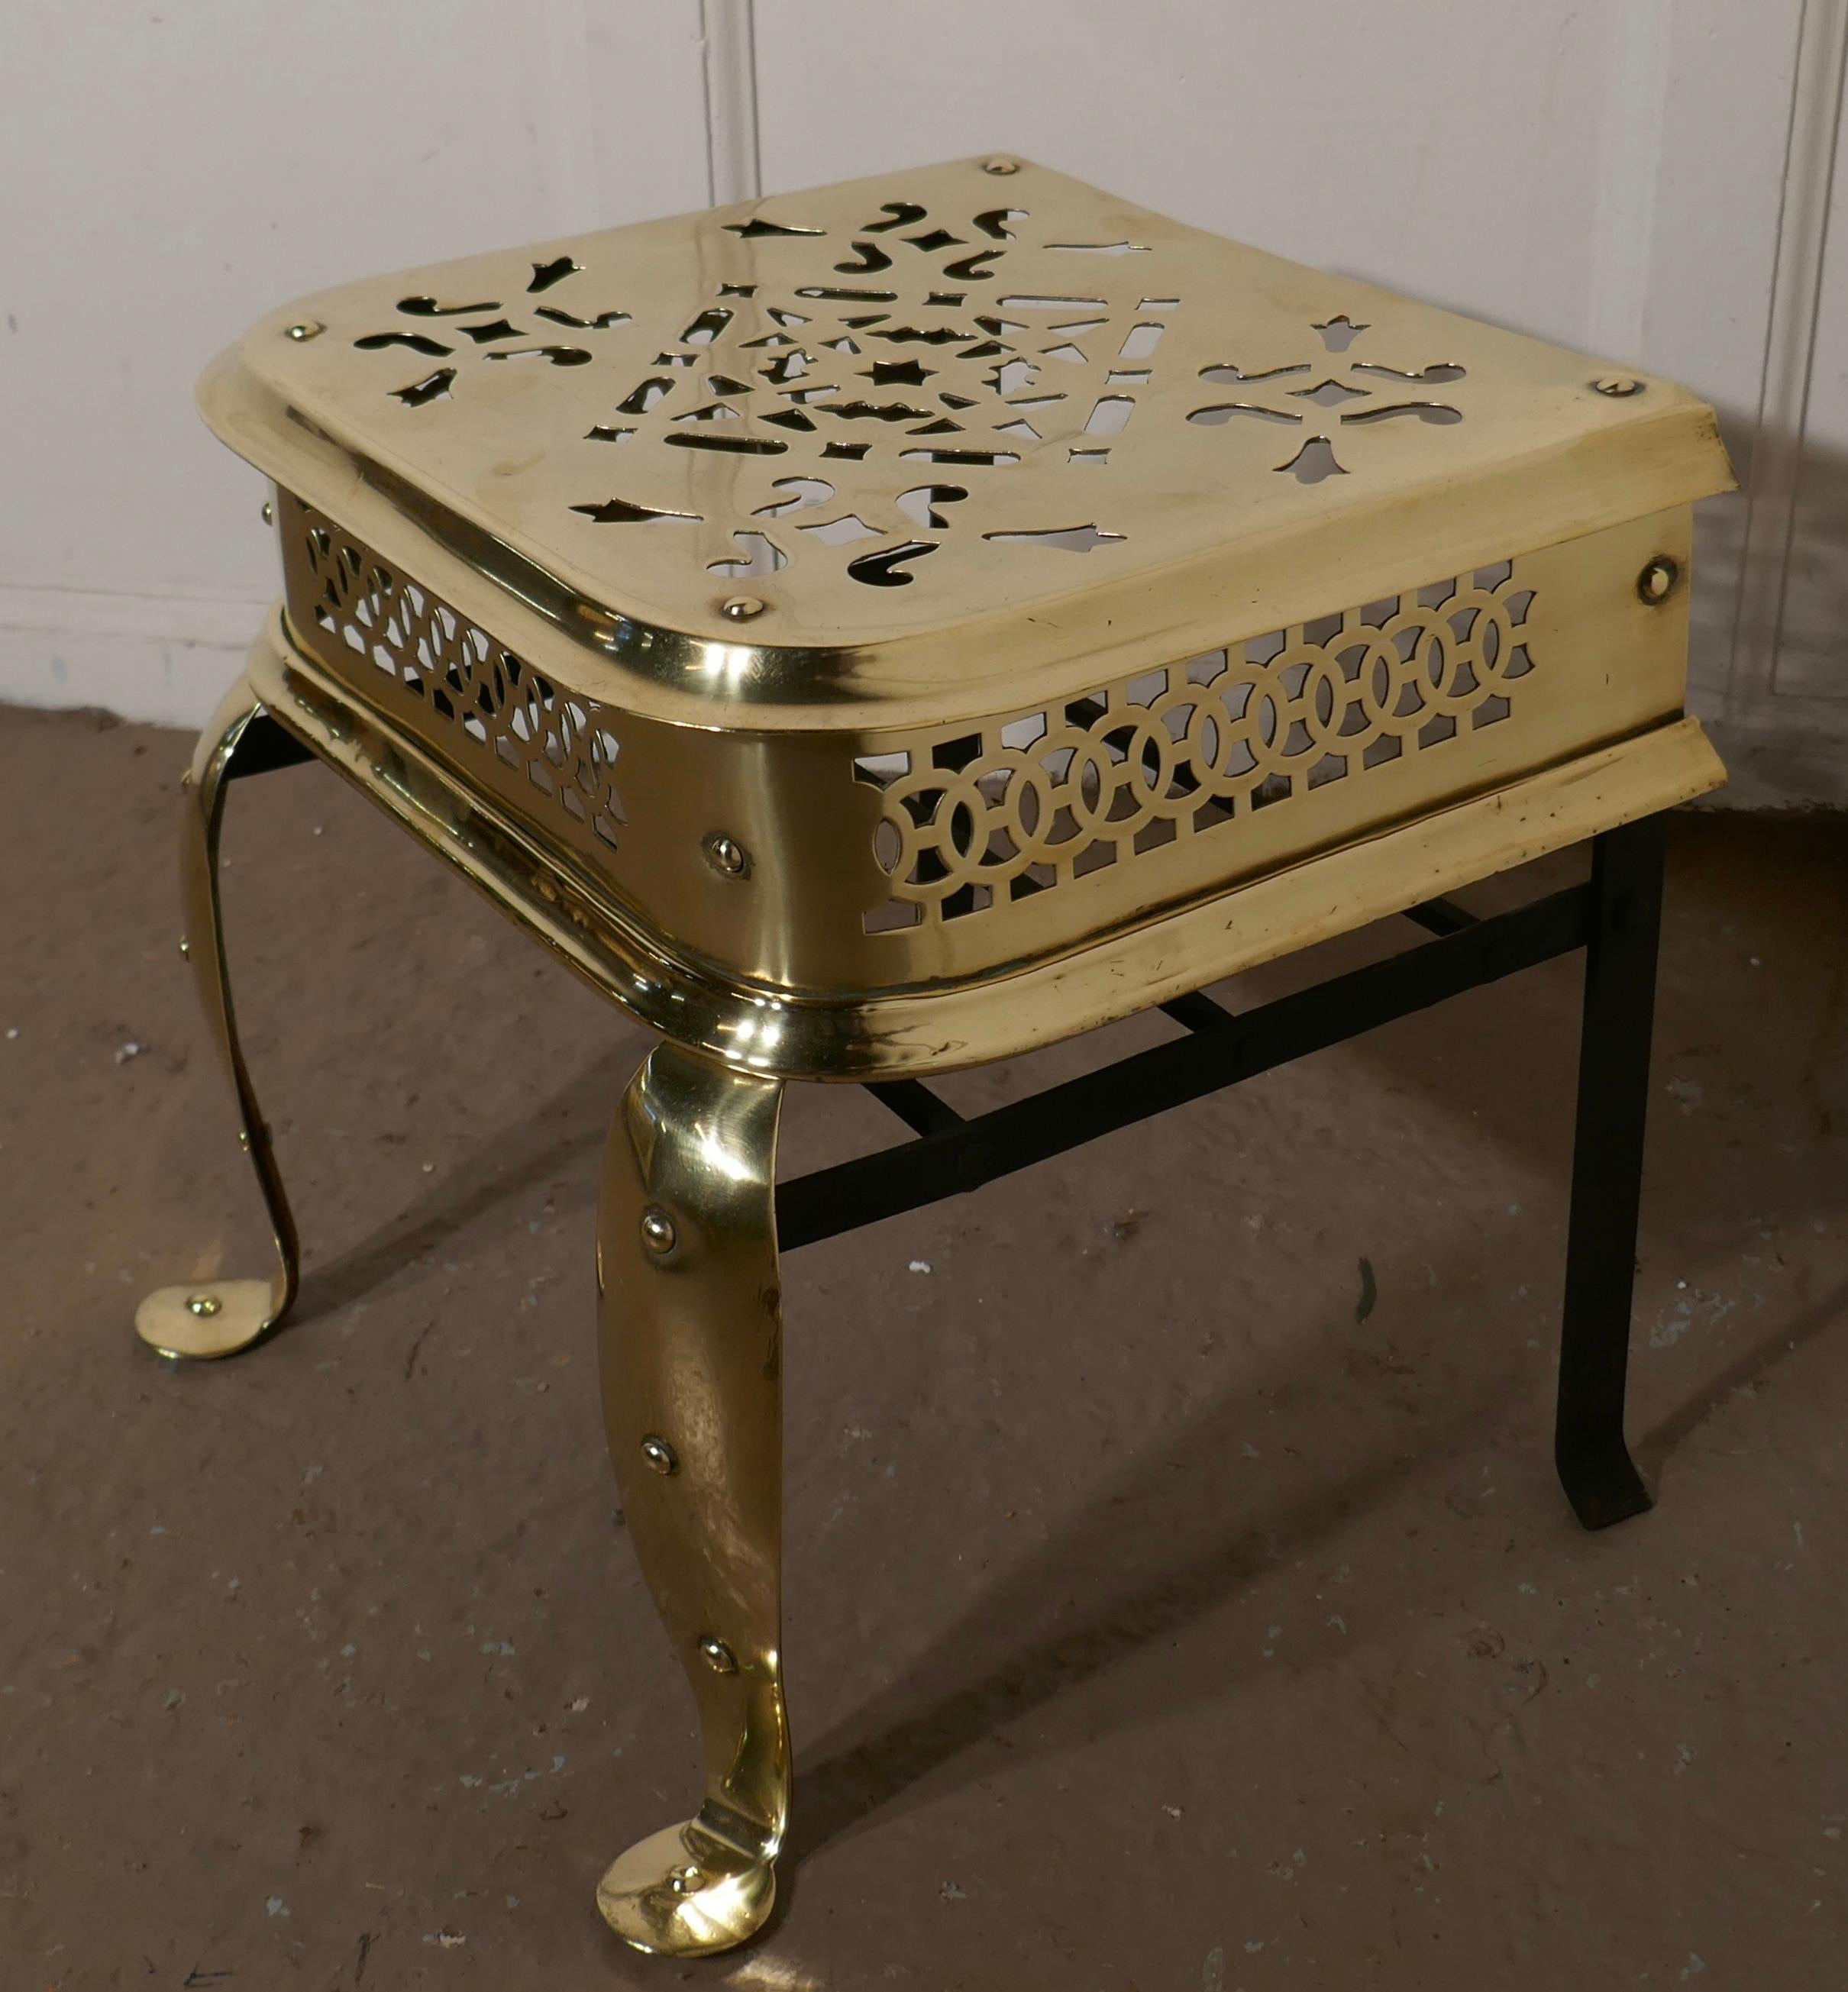 A large sturdy Georgian footman, Kettle Trivet

A large brass footman, with beautiful pierced decoration, the footman stands on big cabriole legs at the front and would look superb by an inglenook fire.
The footman is in very good condition and